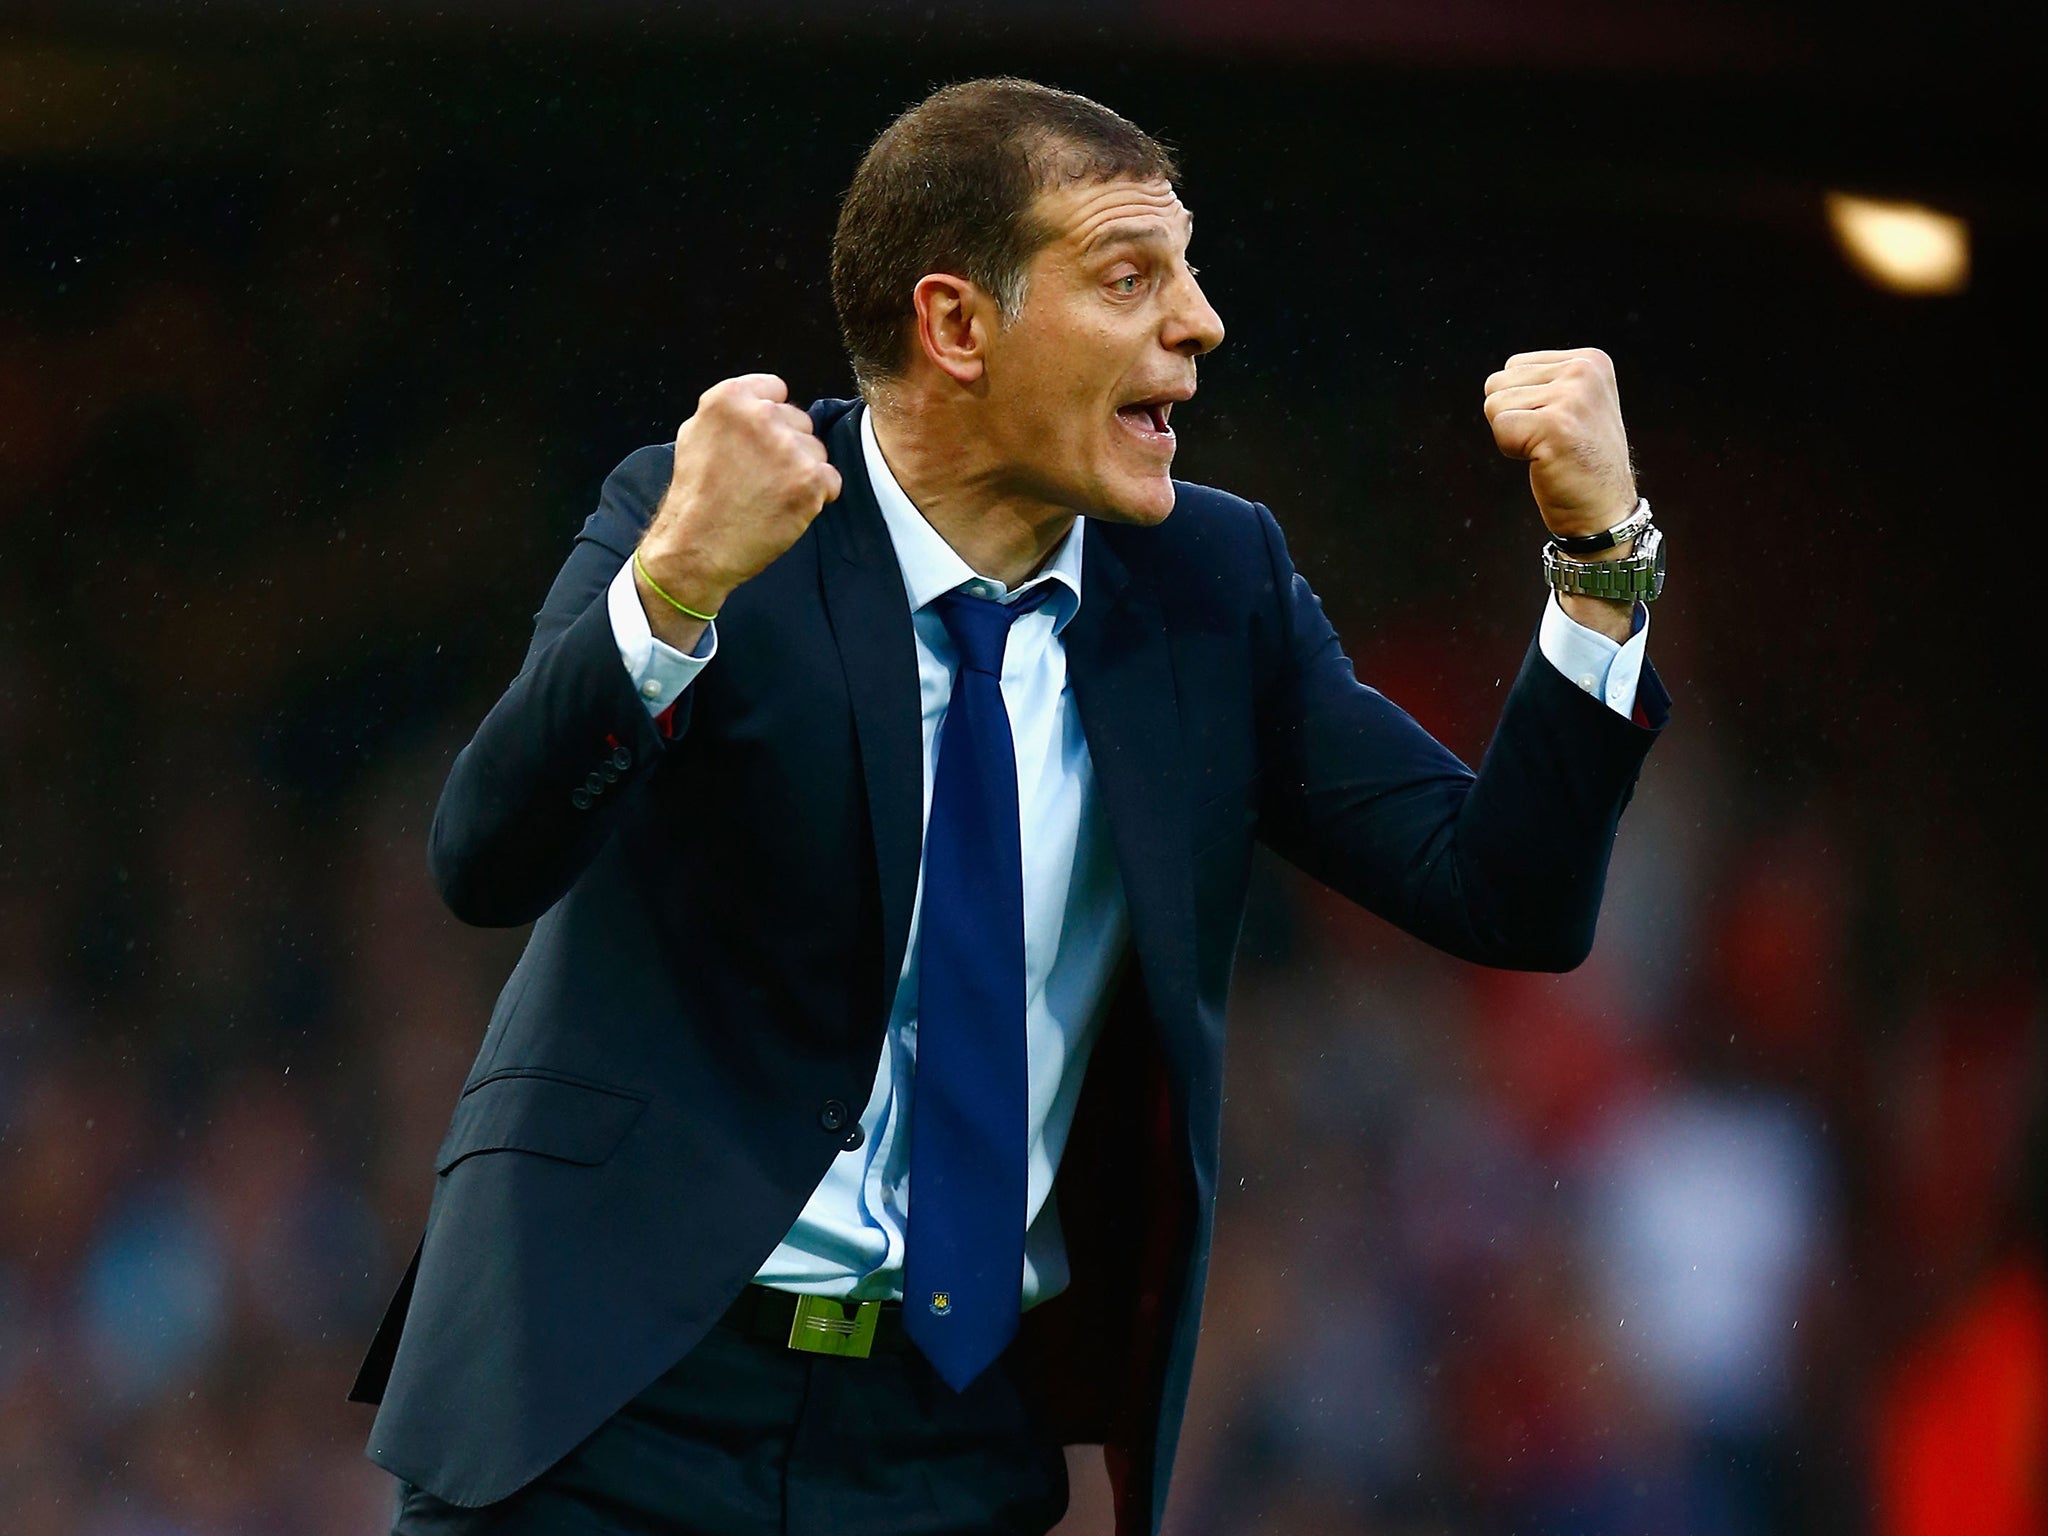 West Ham manager Slaven Bilic reacts on the touchline